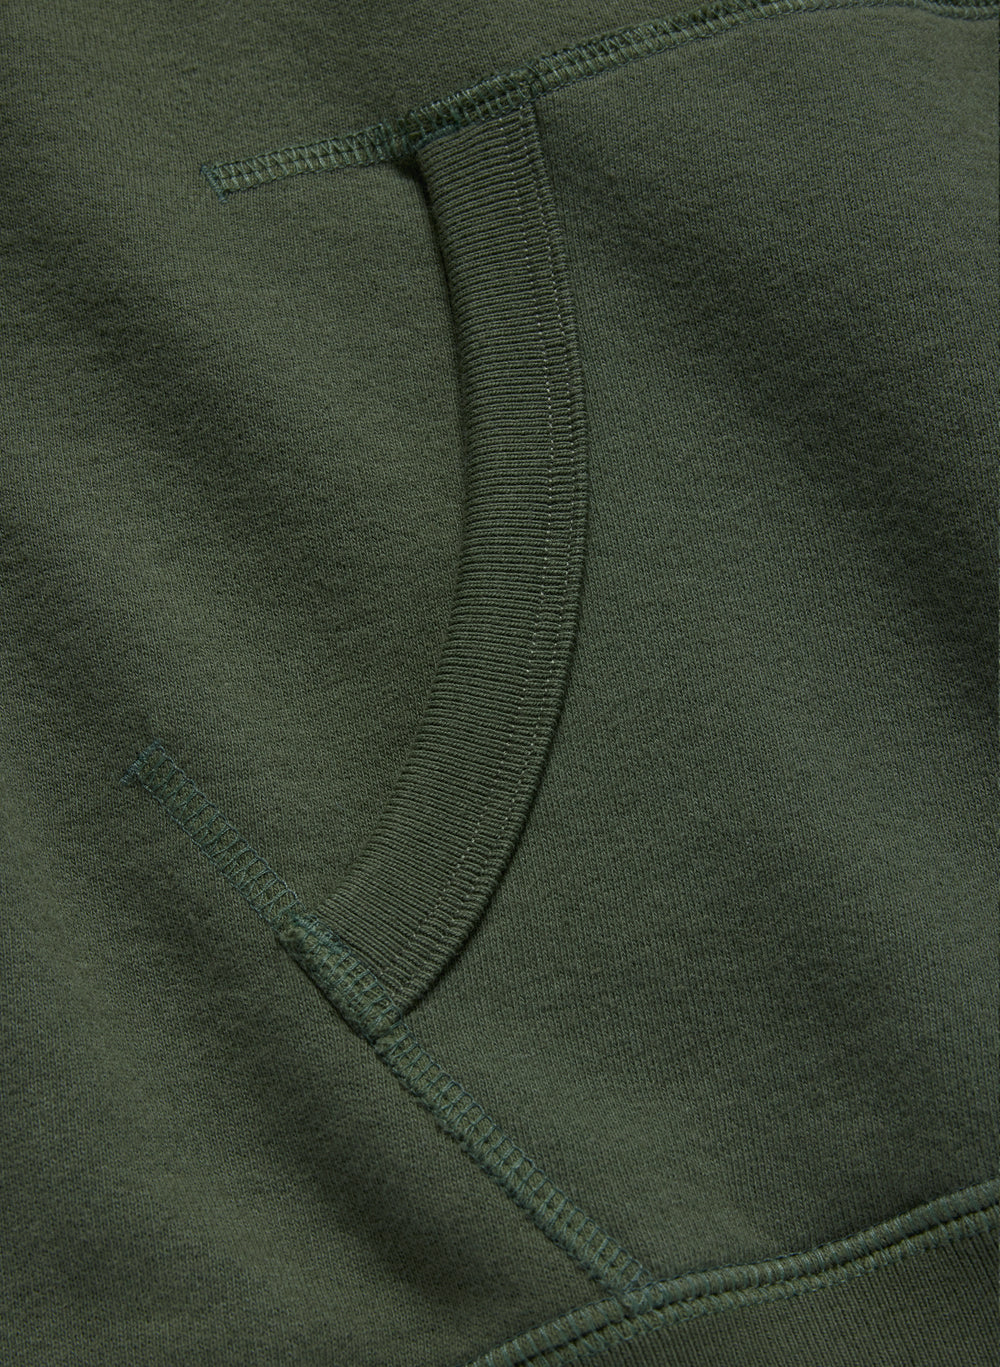 J70 Hoodie - Forest Green